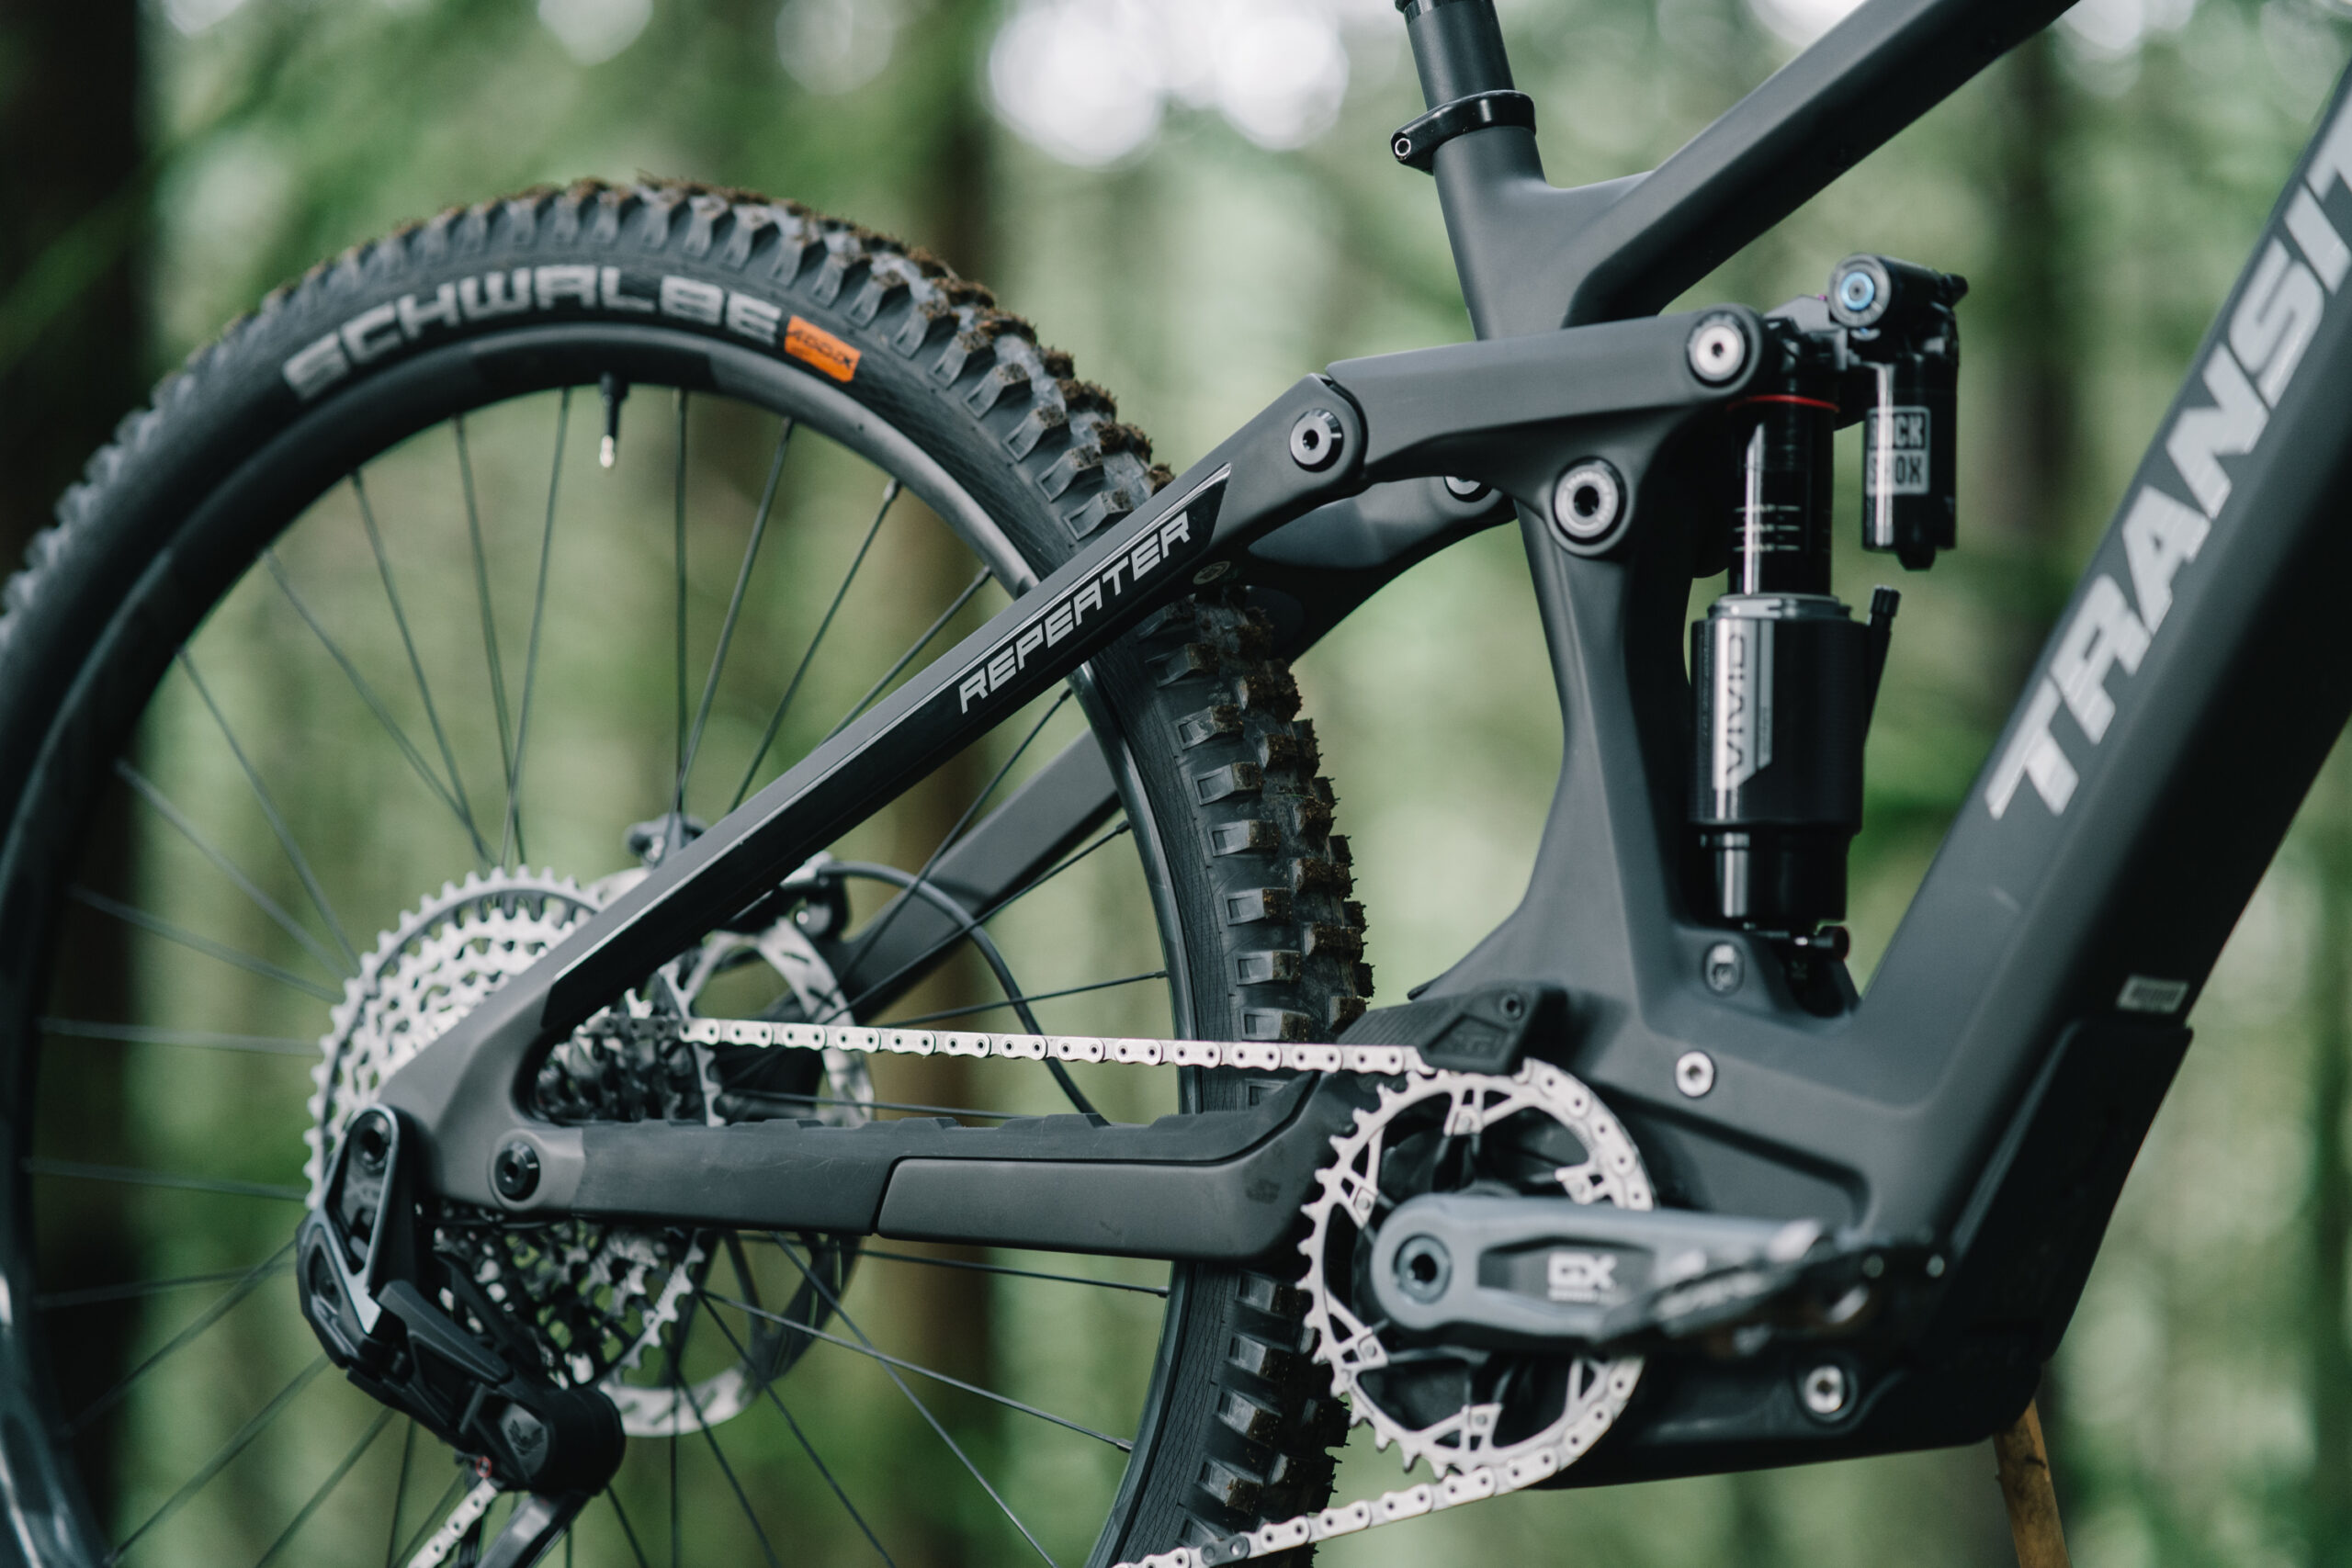 Simon Stewart reviews the Transition Repeater Powertrain for Blister